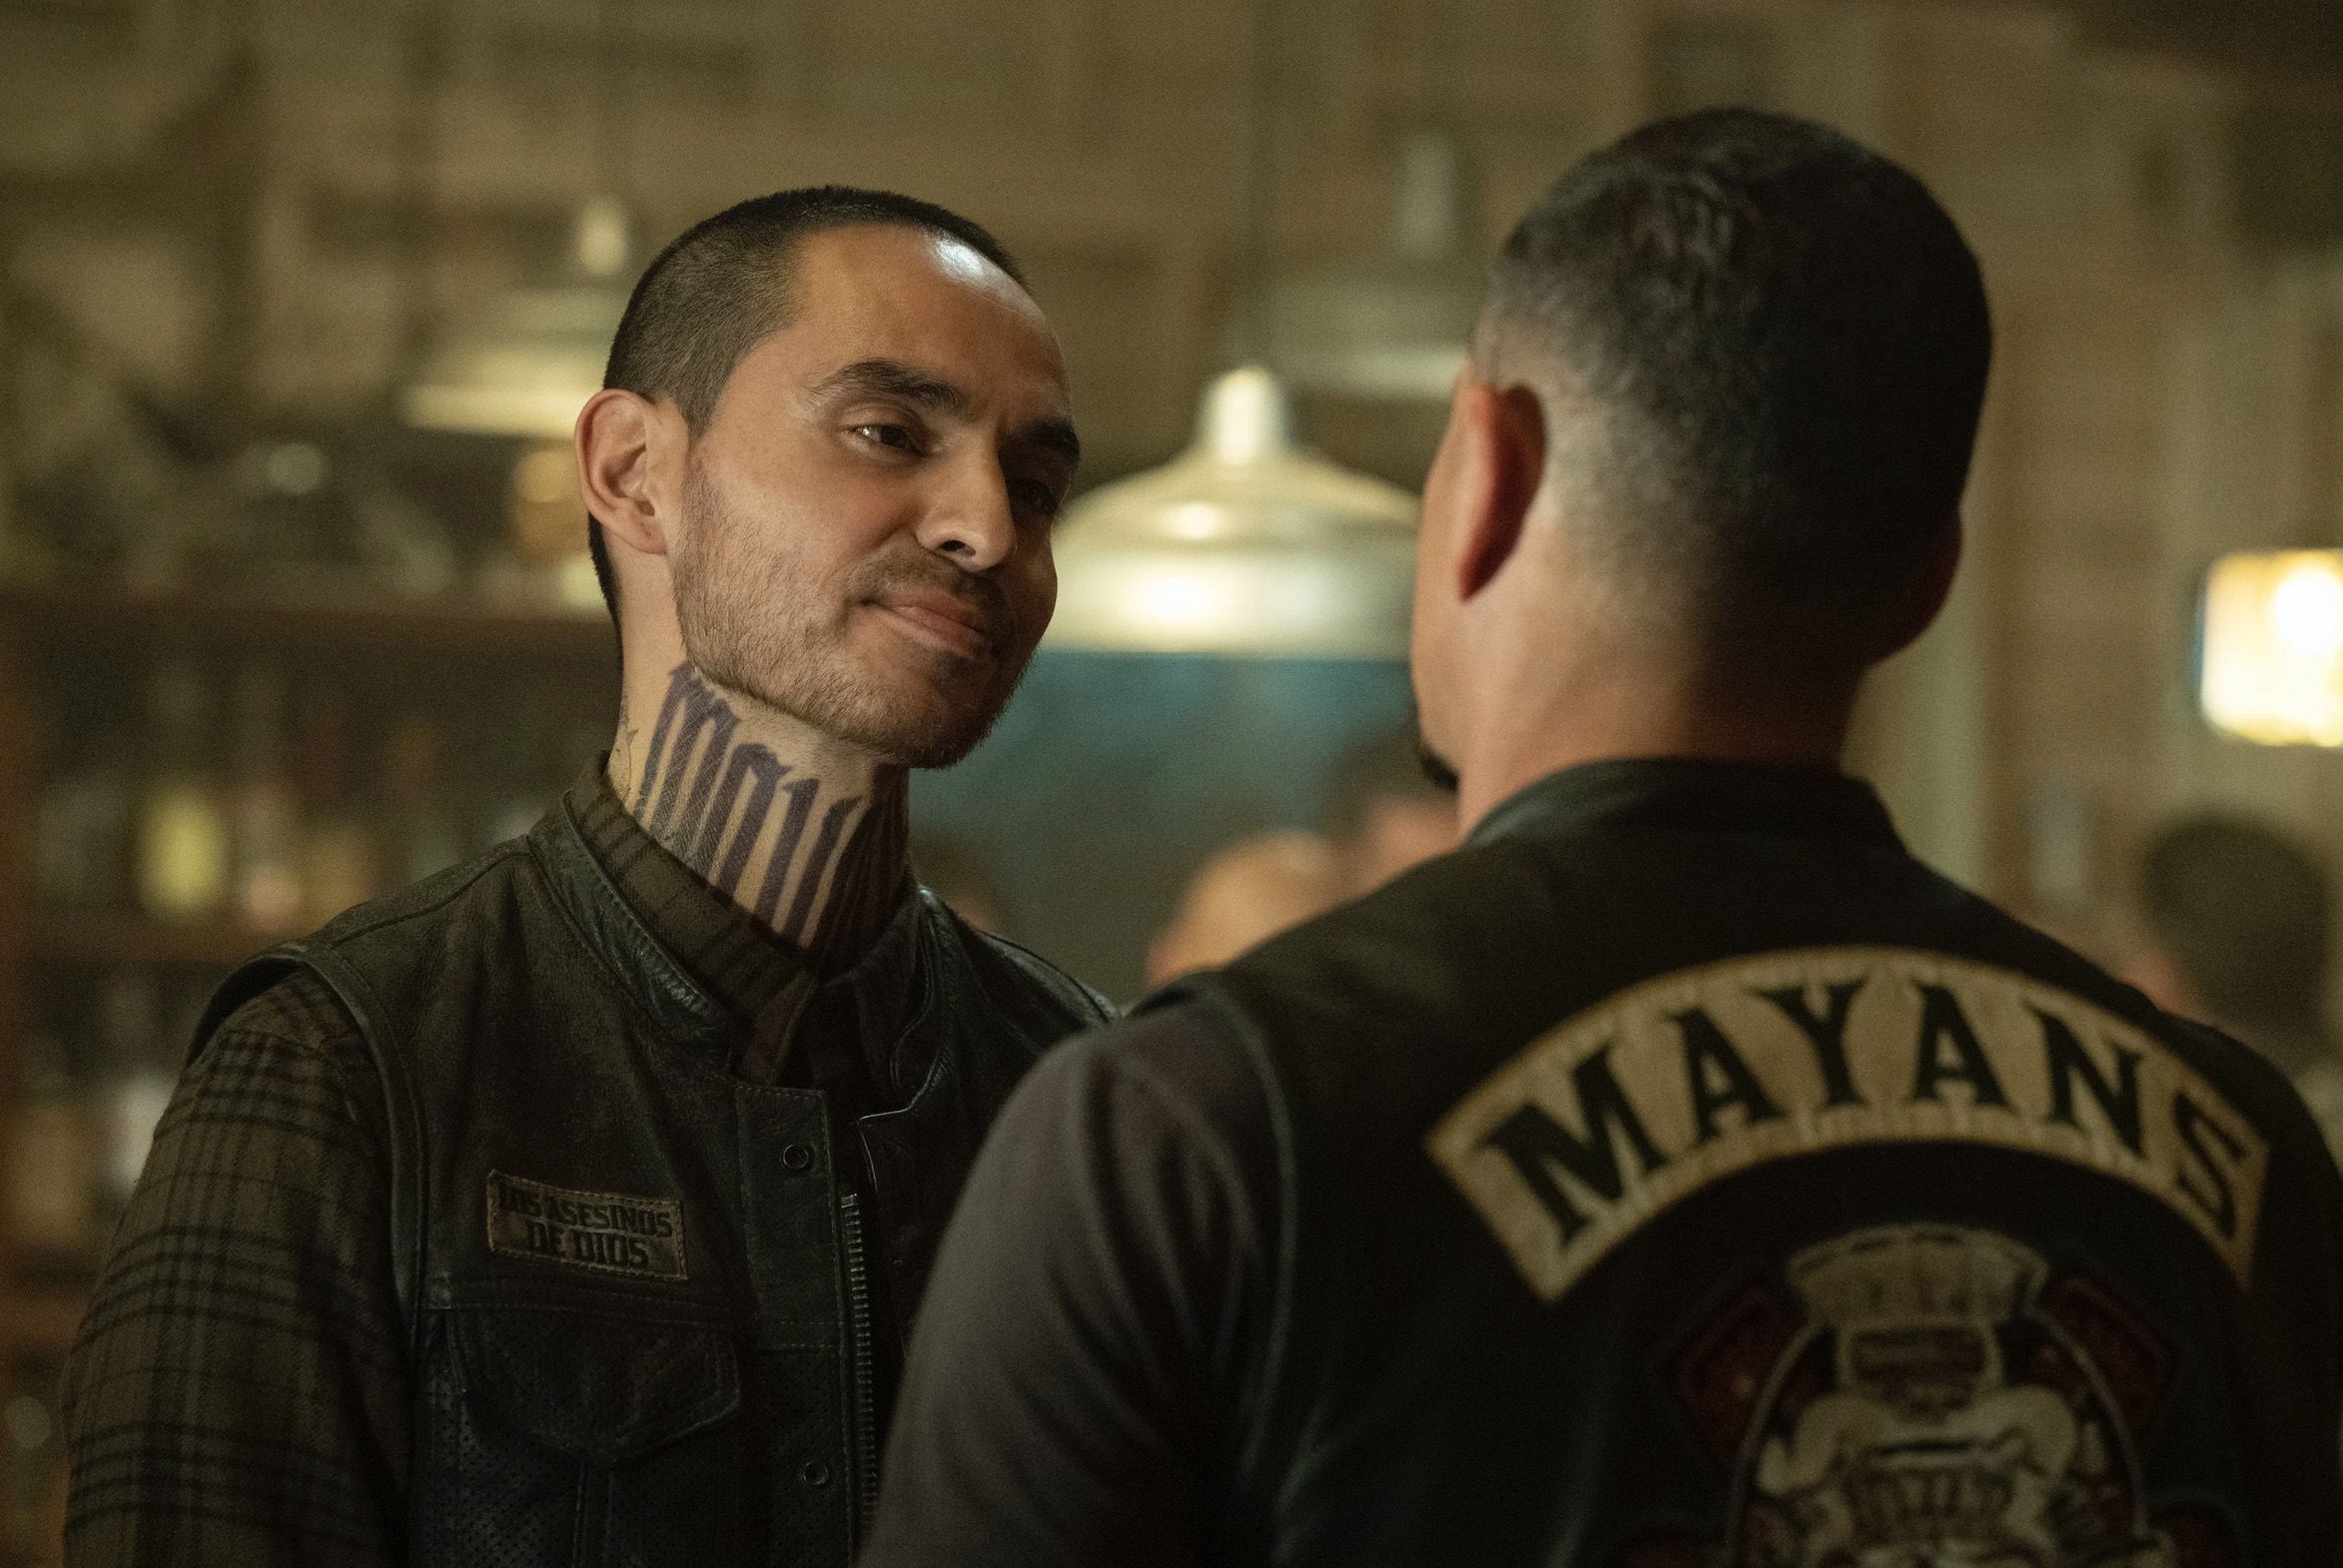 Mayans M.C. Soundtrack on FX and Hulu - Every Song in Season 4, Episode 4